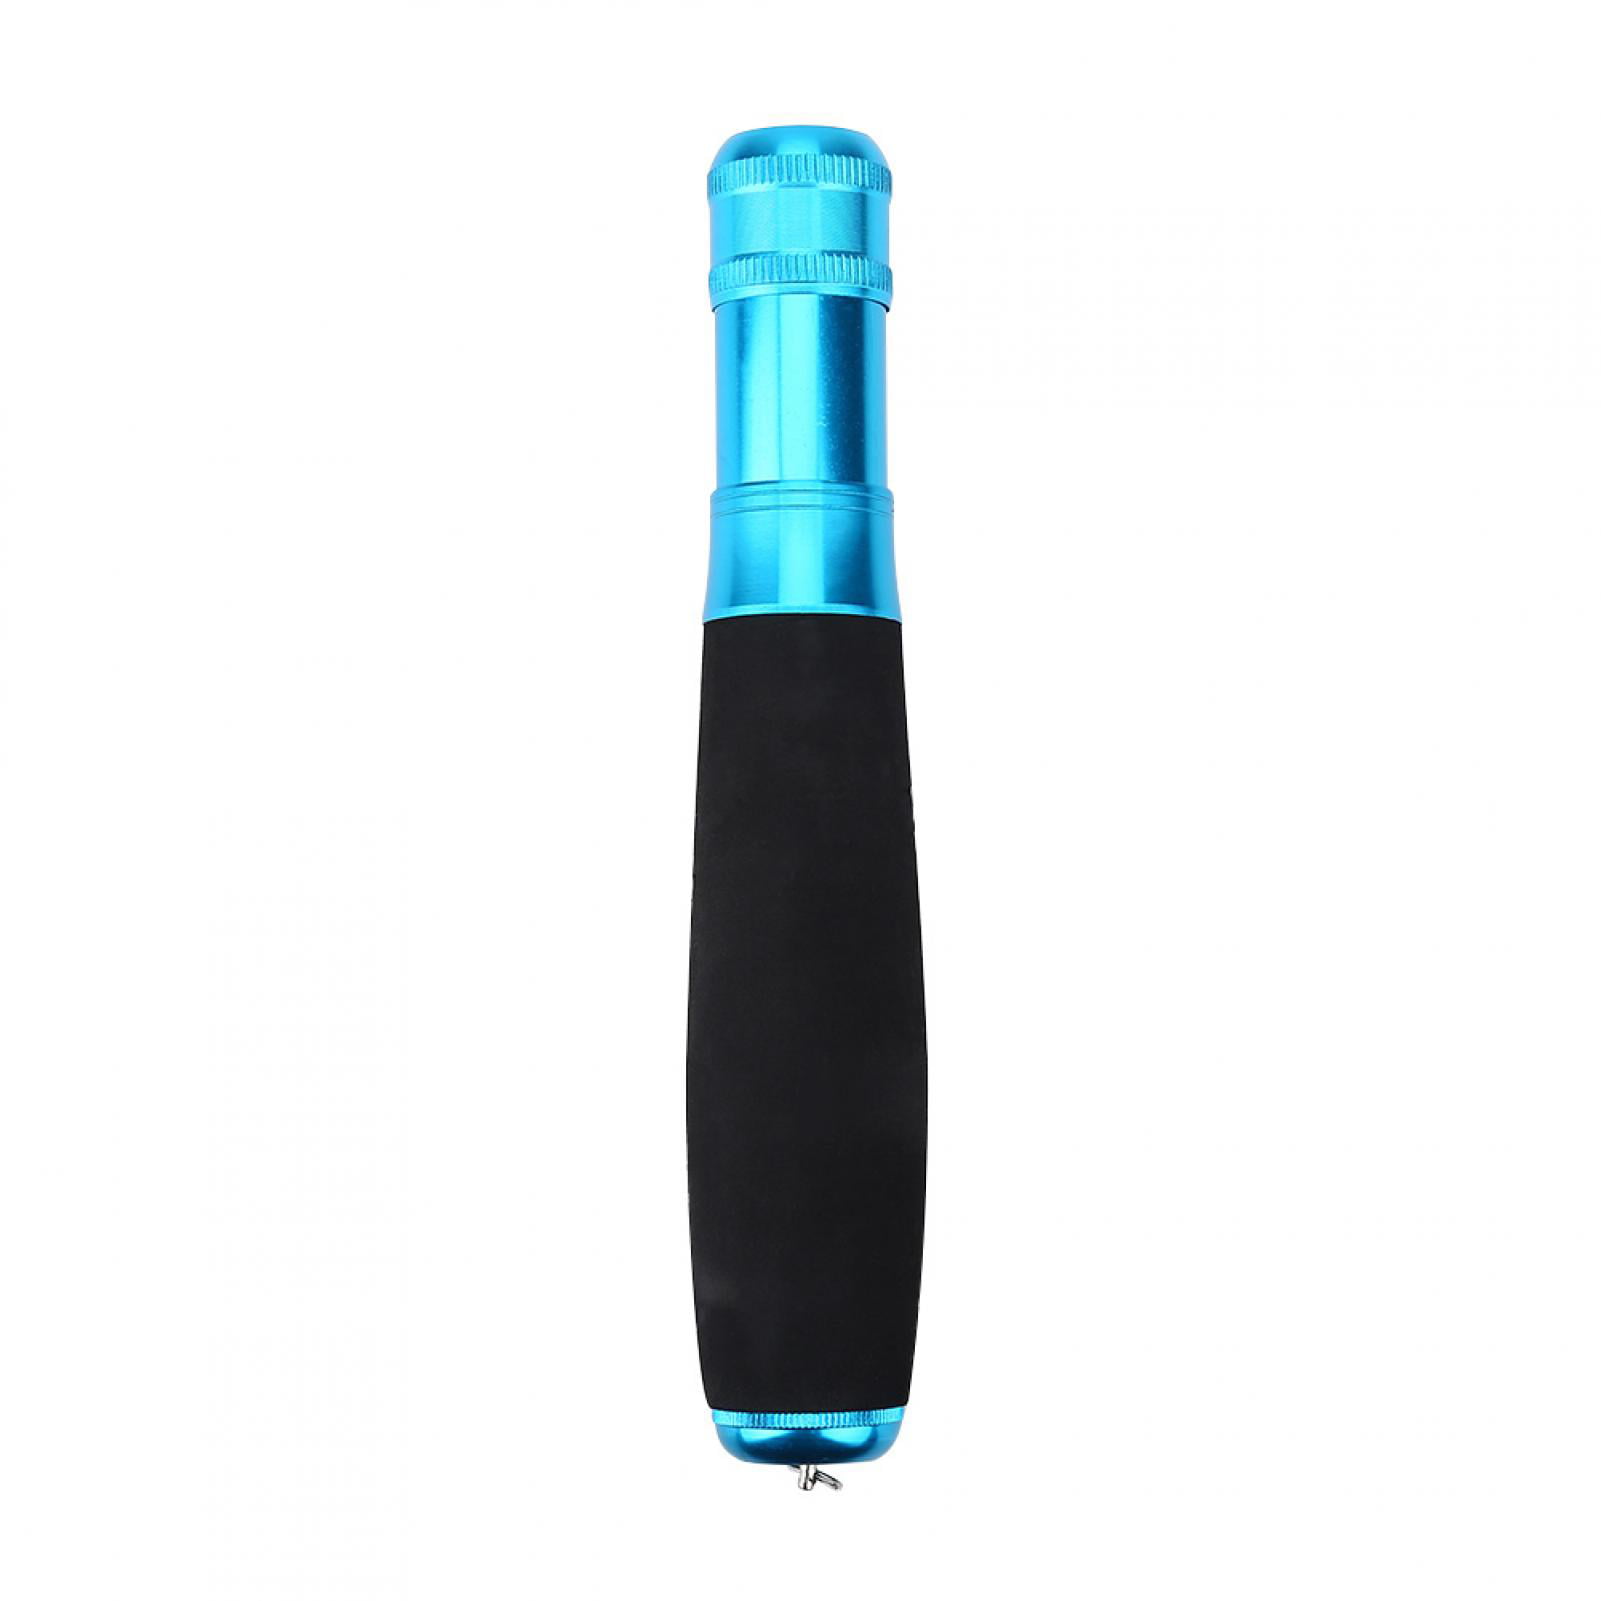 Details about   Fishing Rod Handle Grip Multi-function Metal Fishing Pole Handle Grip For DIY 